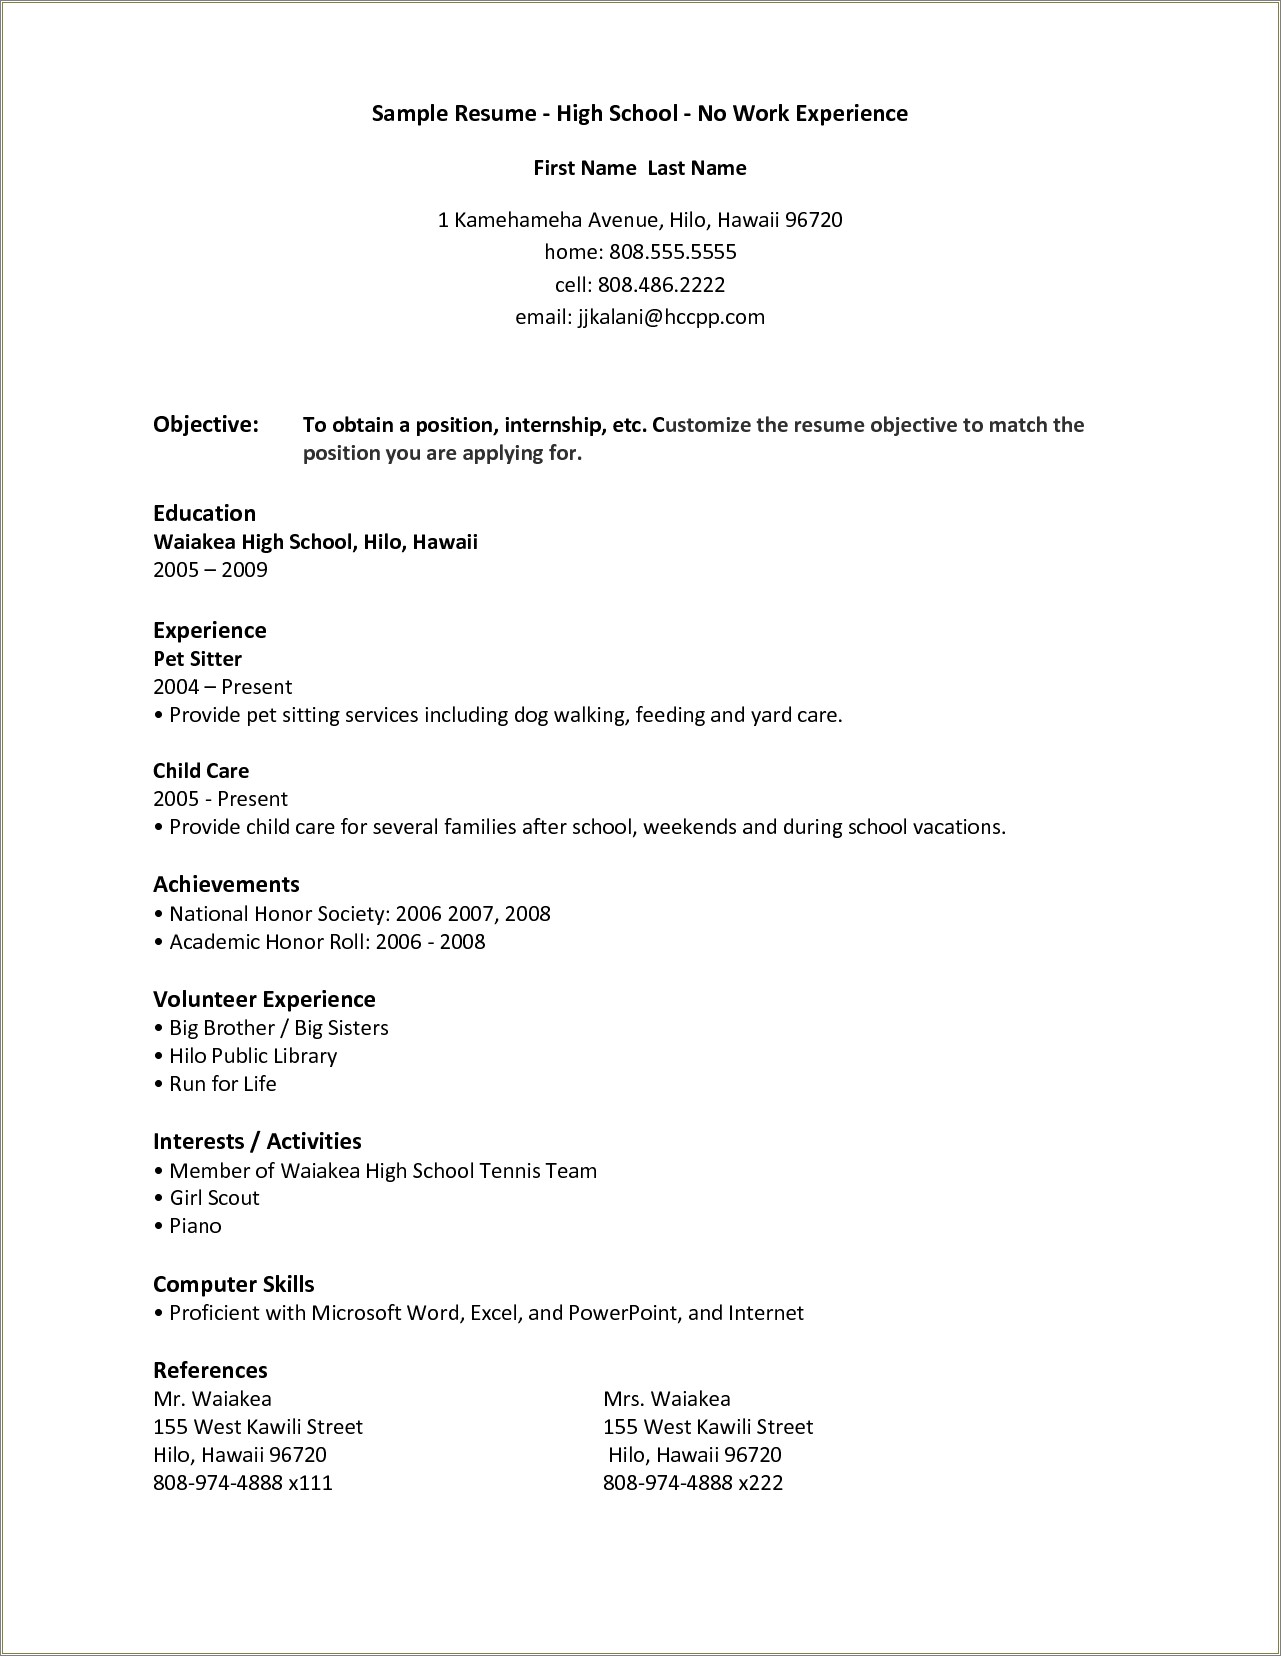 Sample Resume For A Homemaker With No Experience